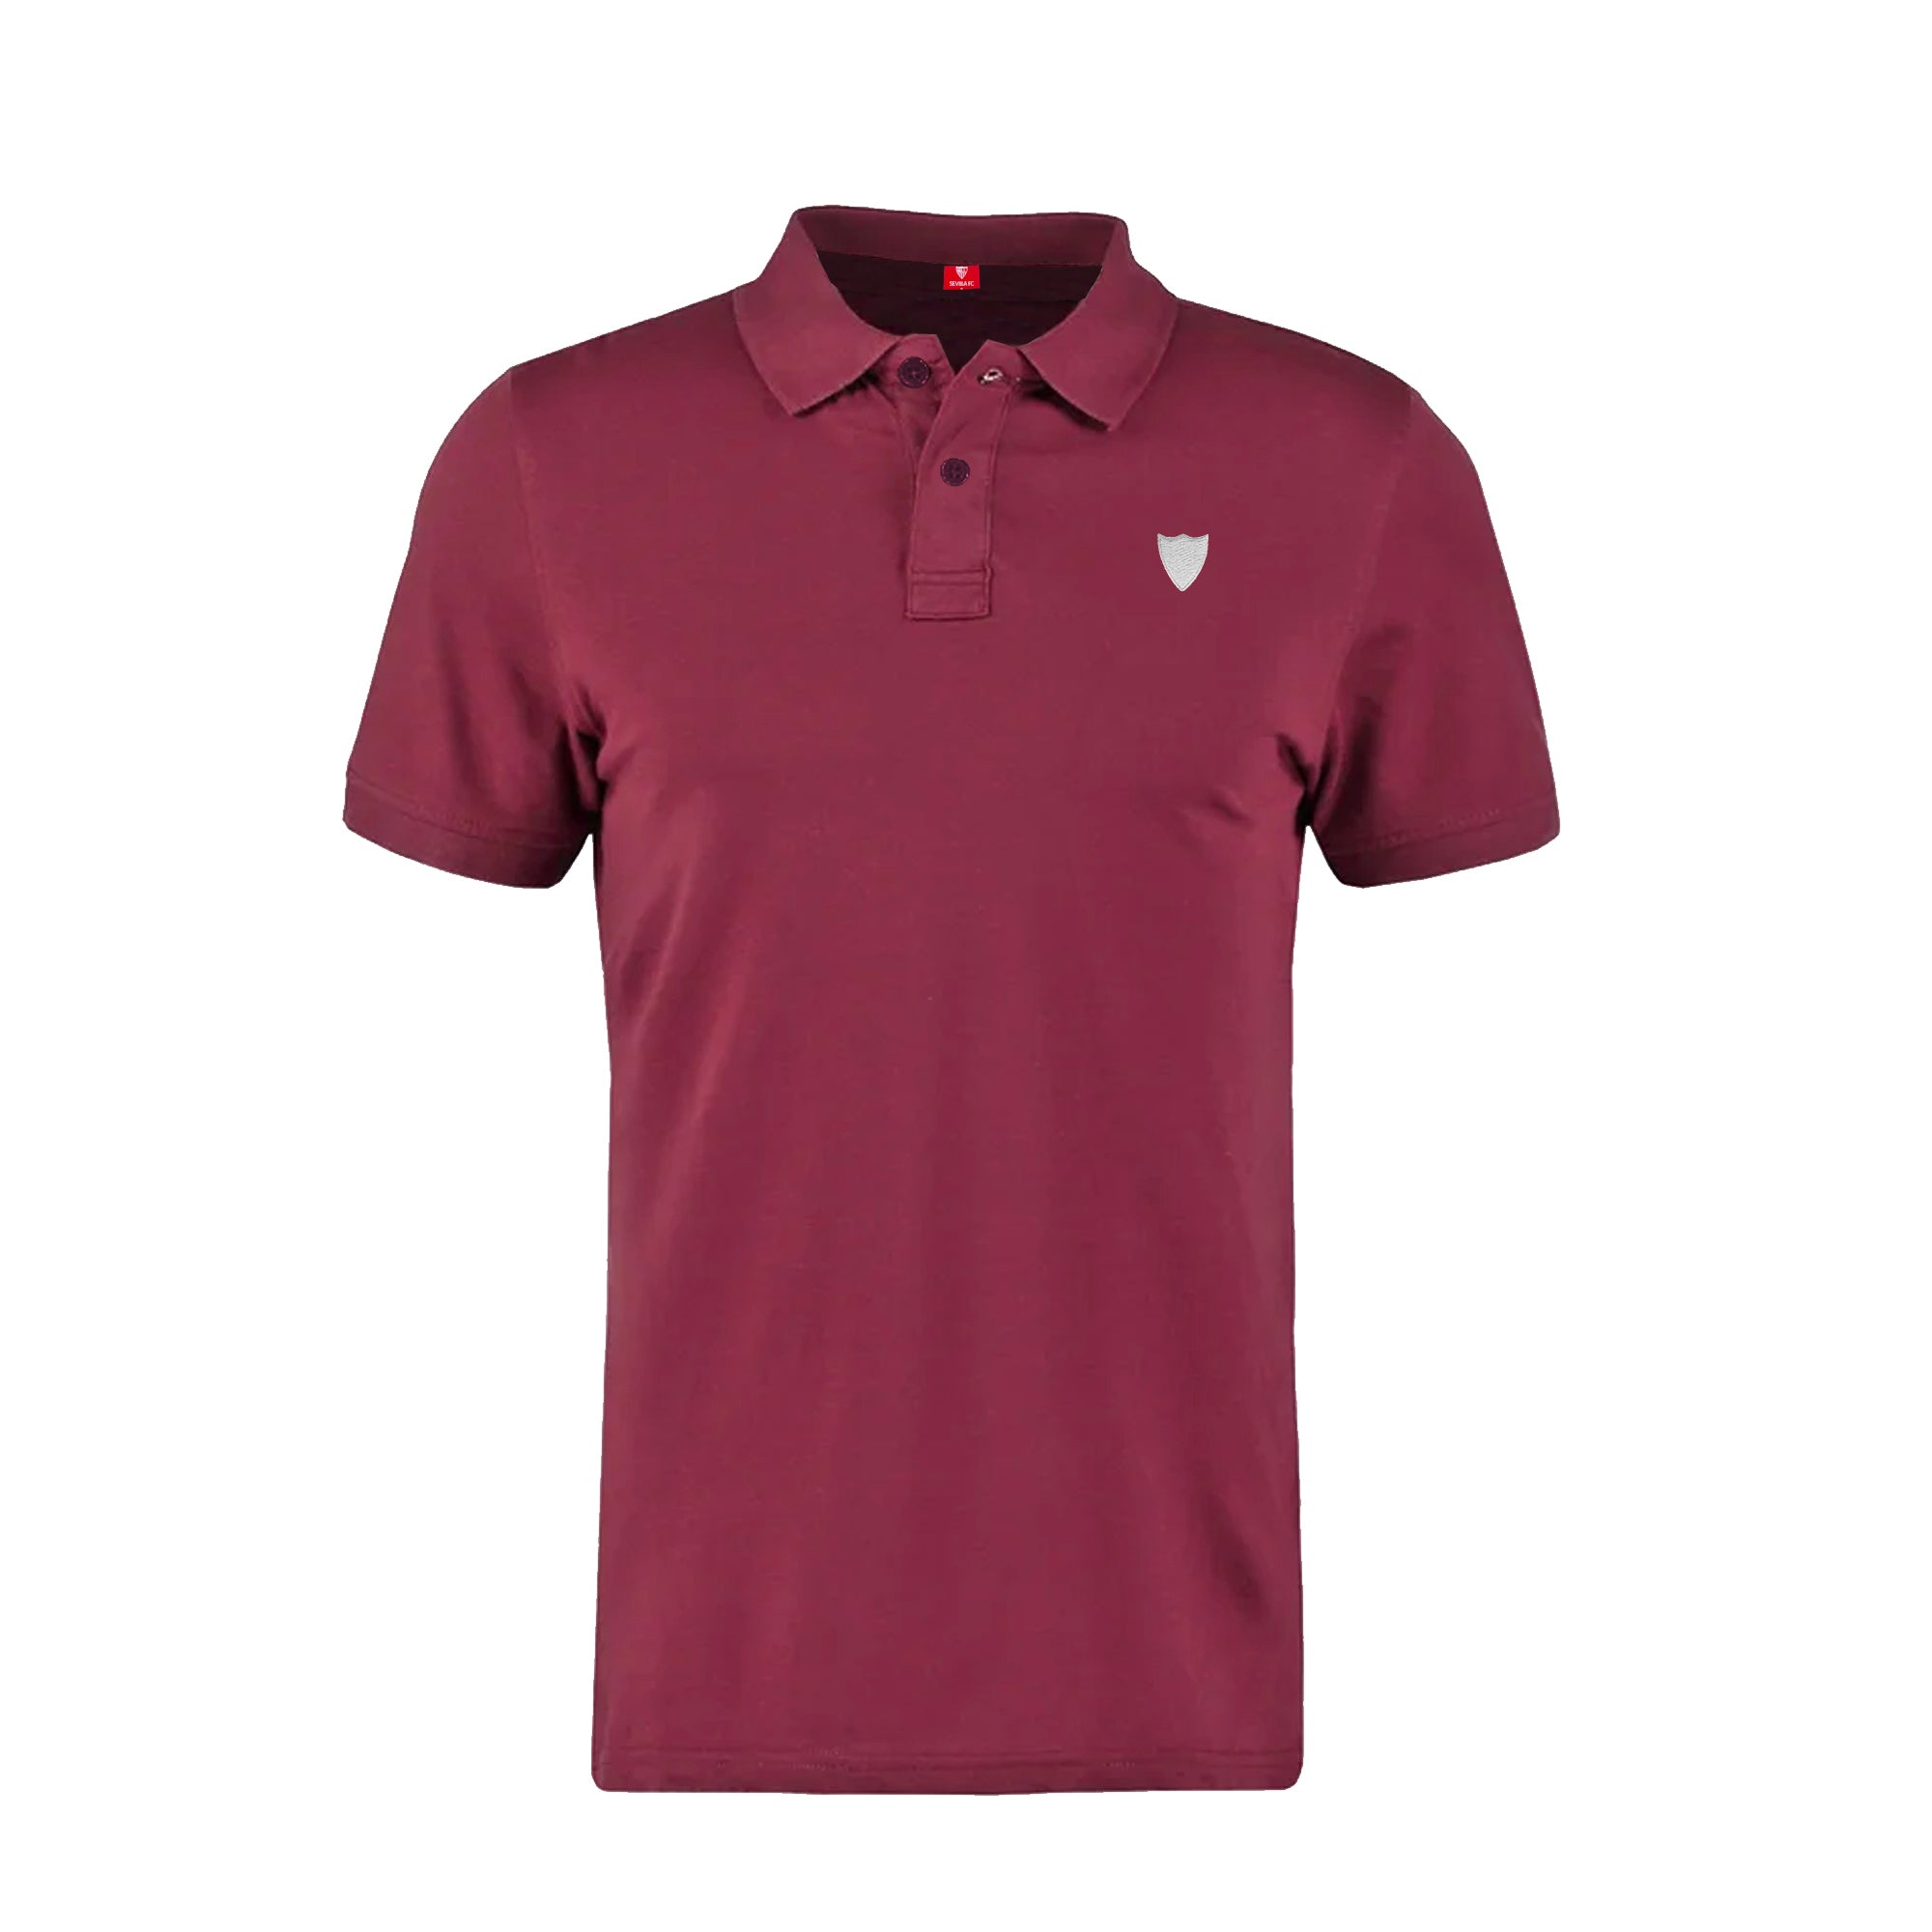 Adult Burgundy Polo With Crest 23/24